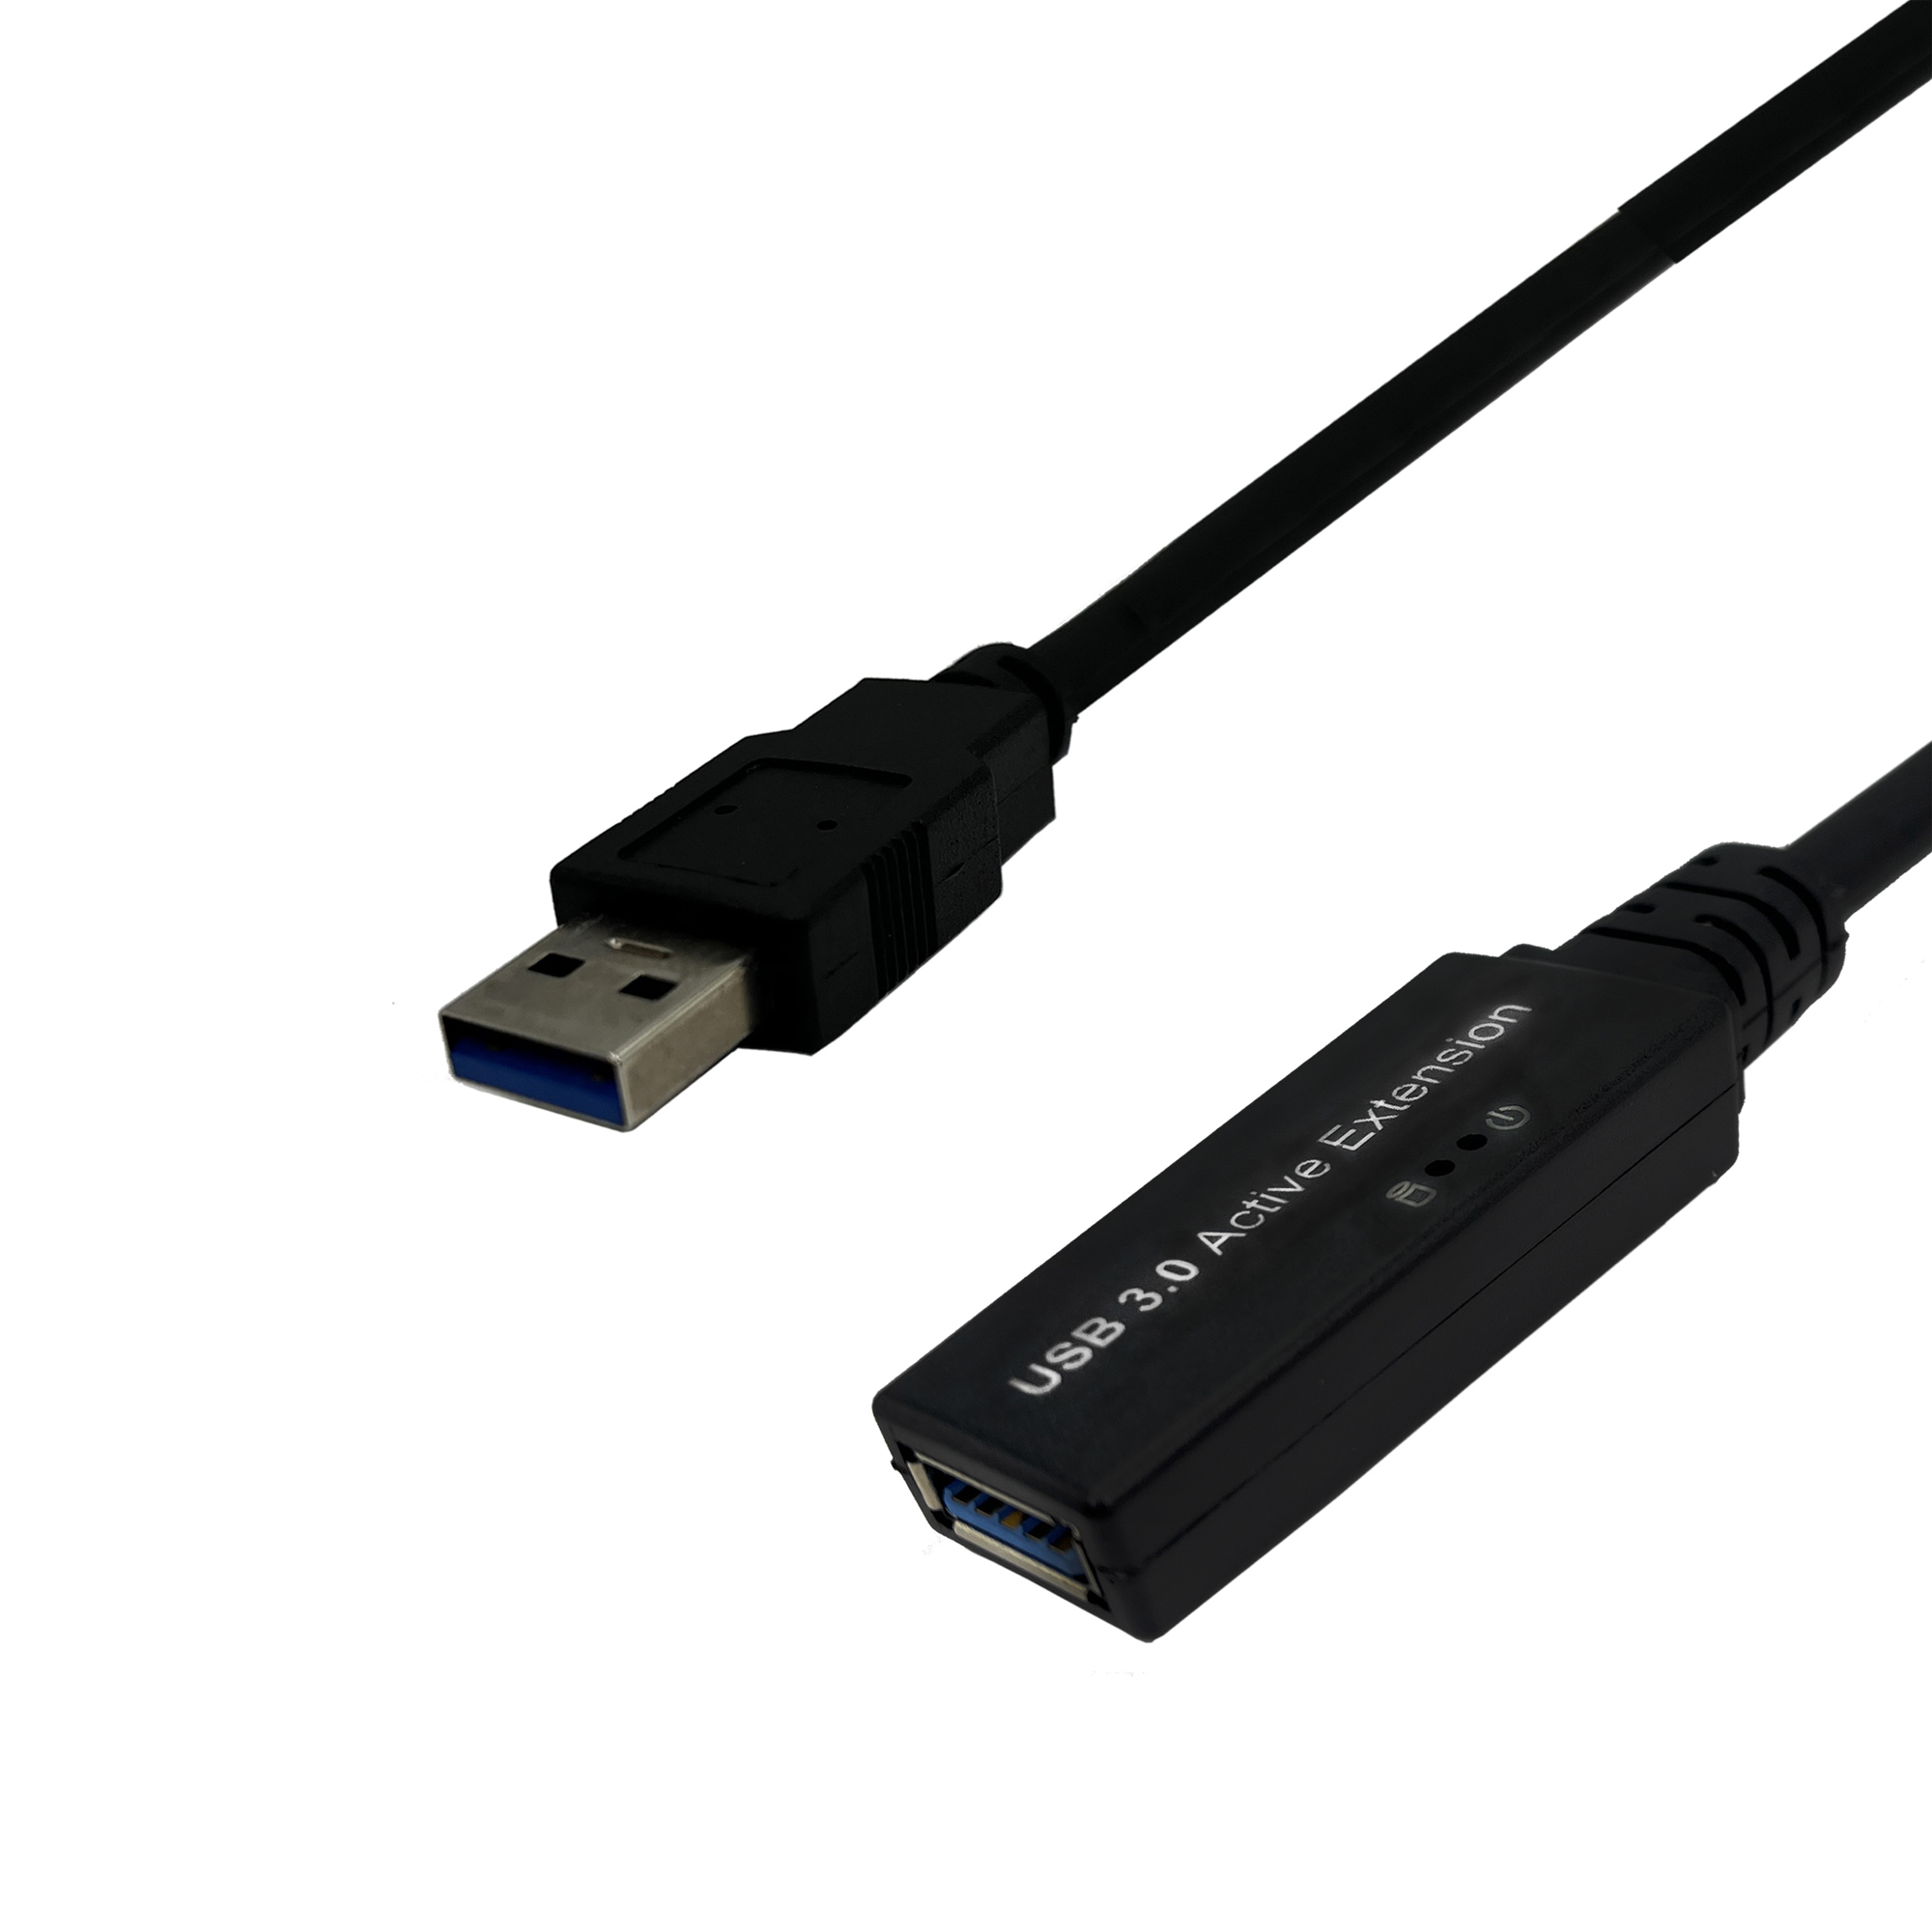 Photos - Cable (video, audio, USB) GEAR connektgear 5m USB 3 Active Extension Cable A Male to A Female - High 26-3 